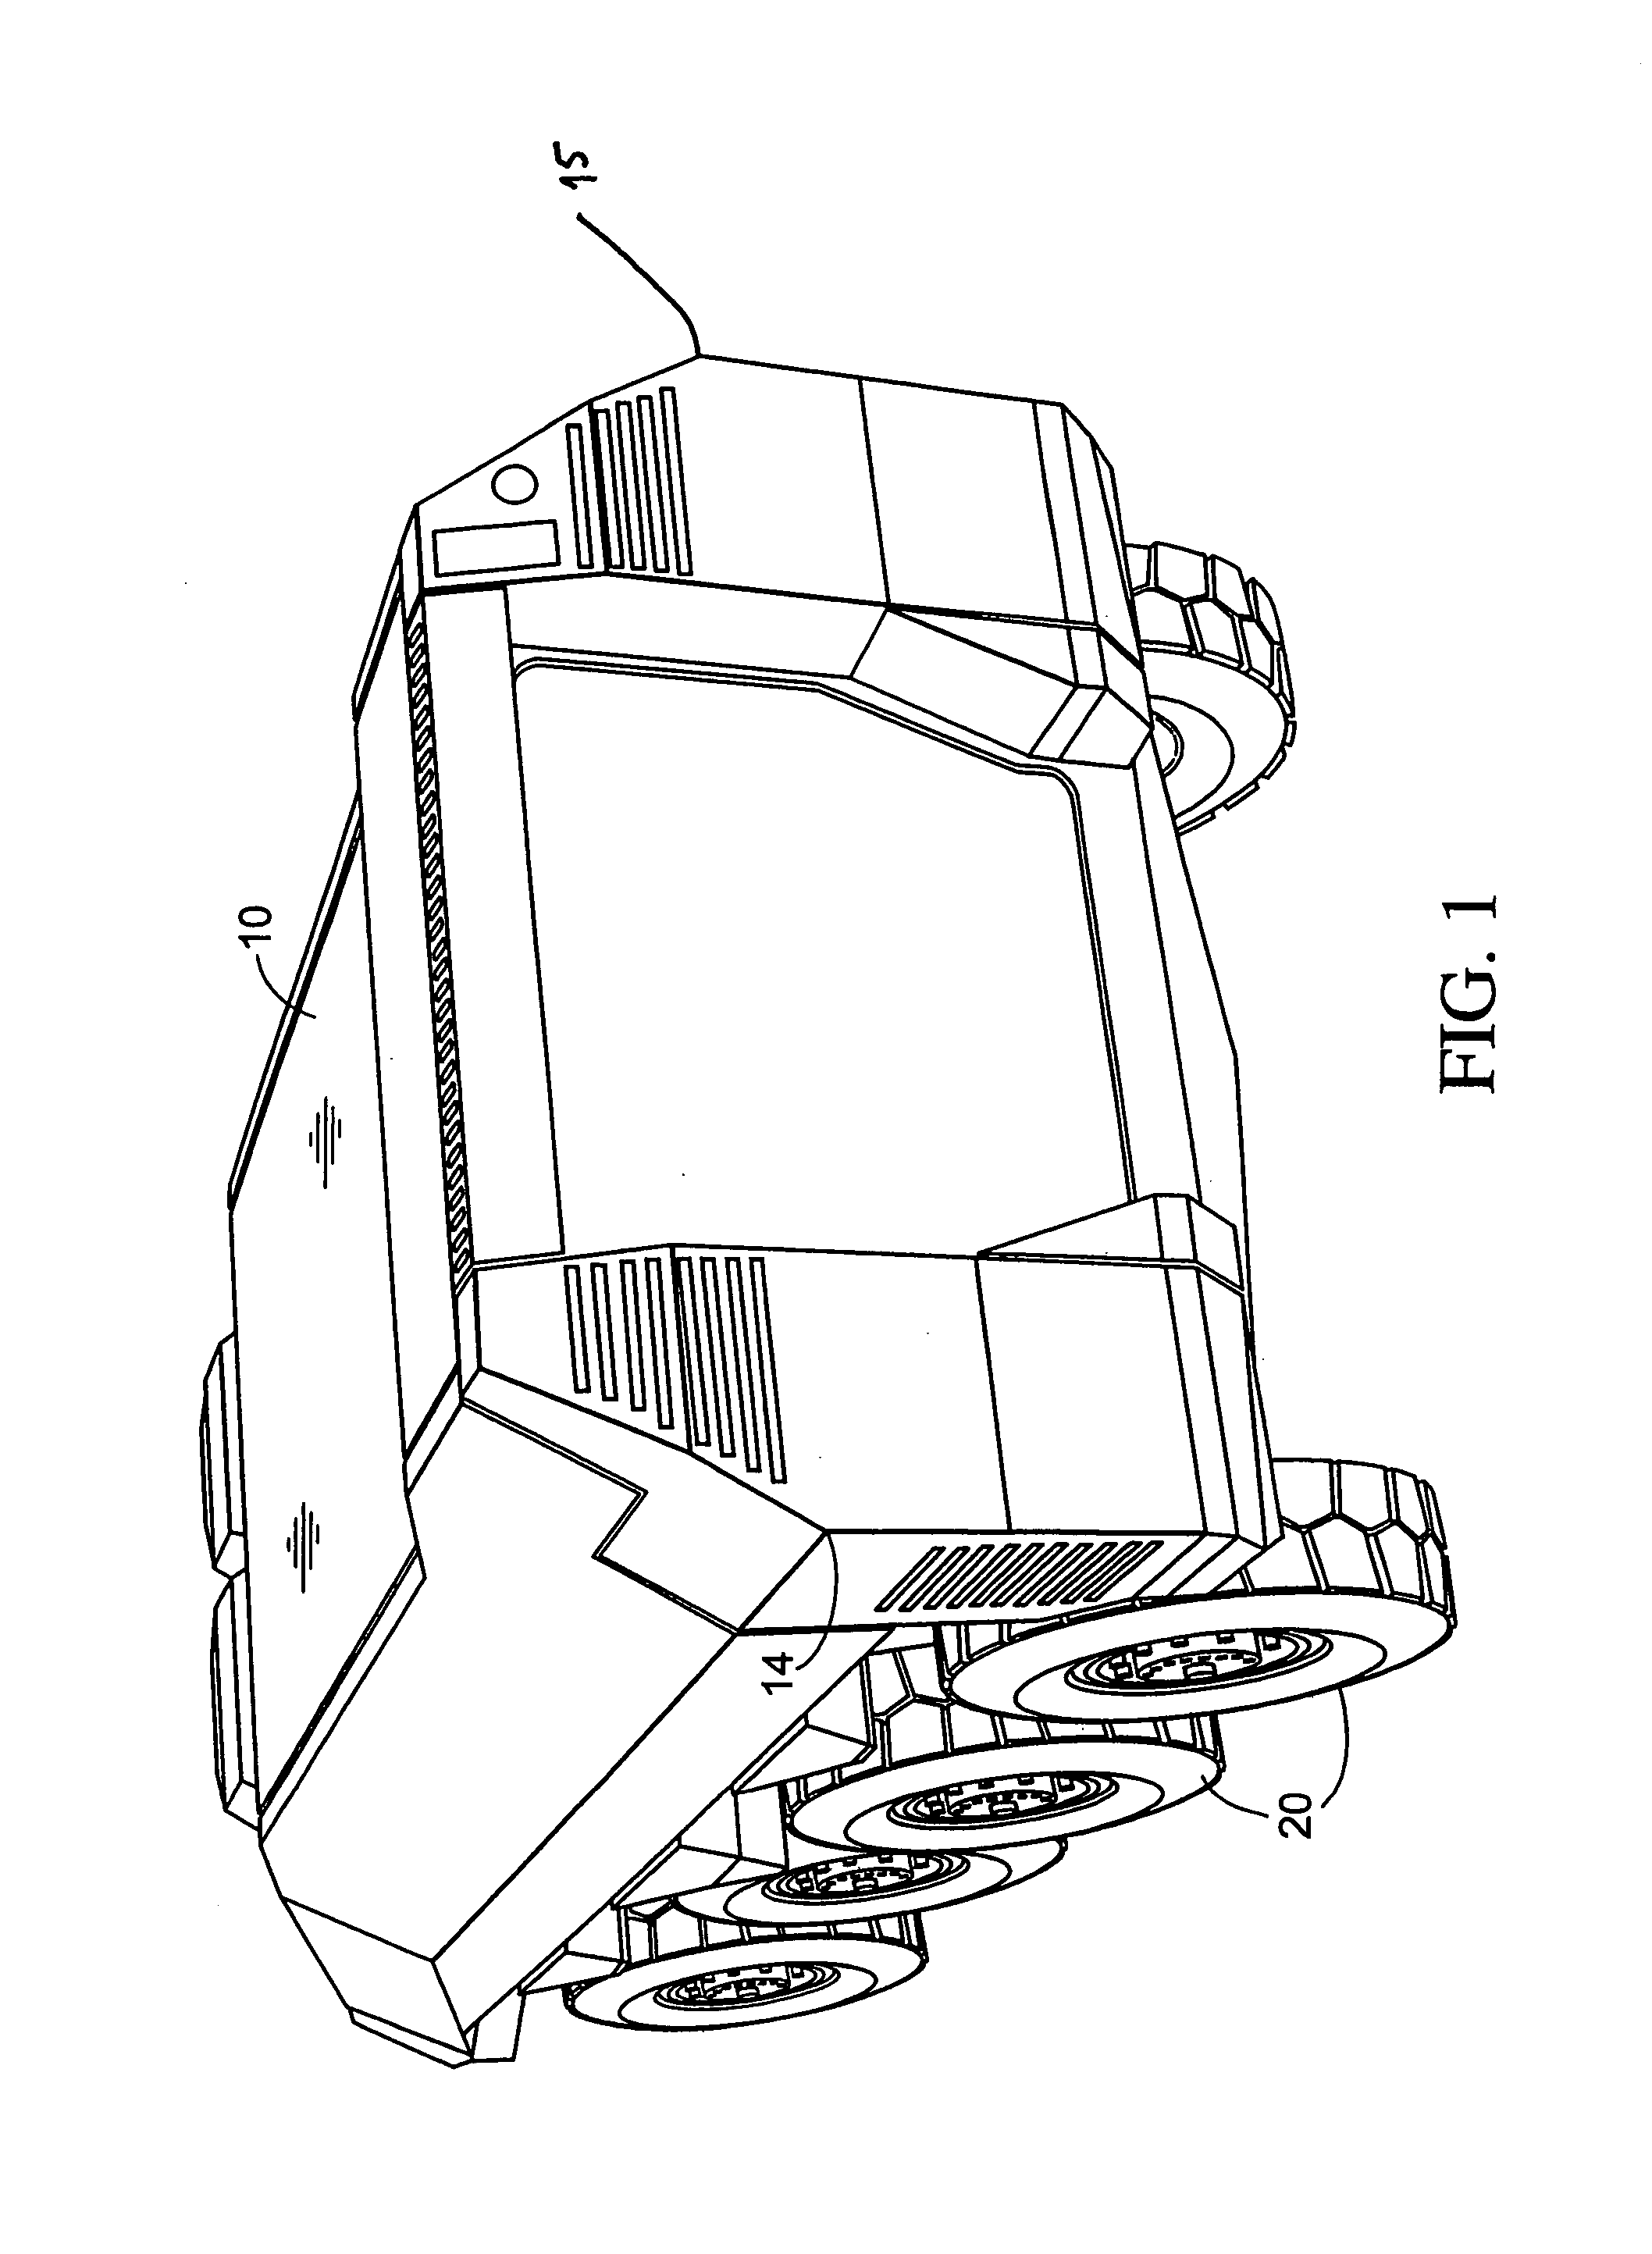 Rear mounted engine design with improved maintenance access for a military vehicle